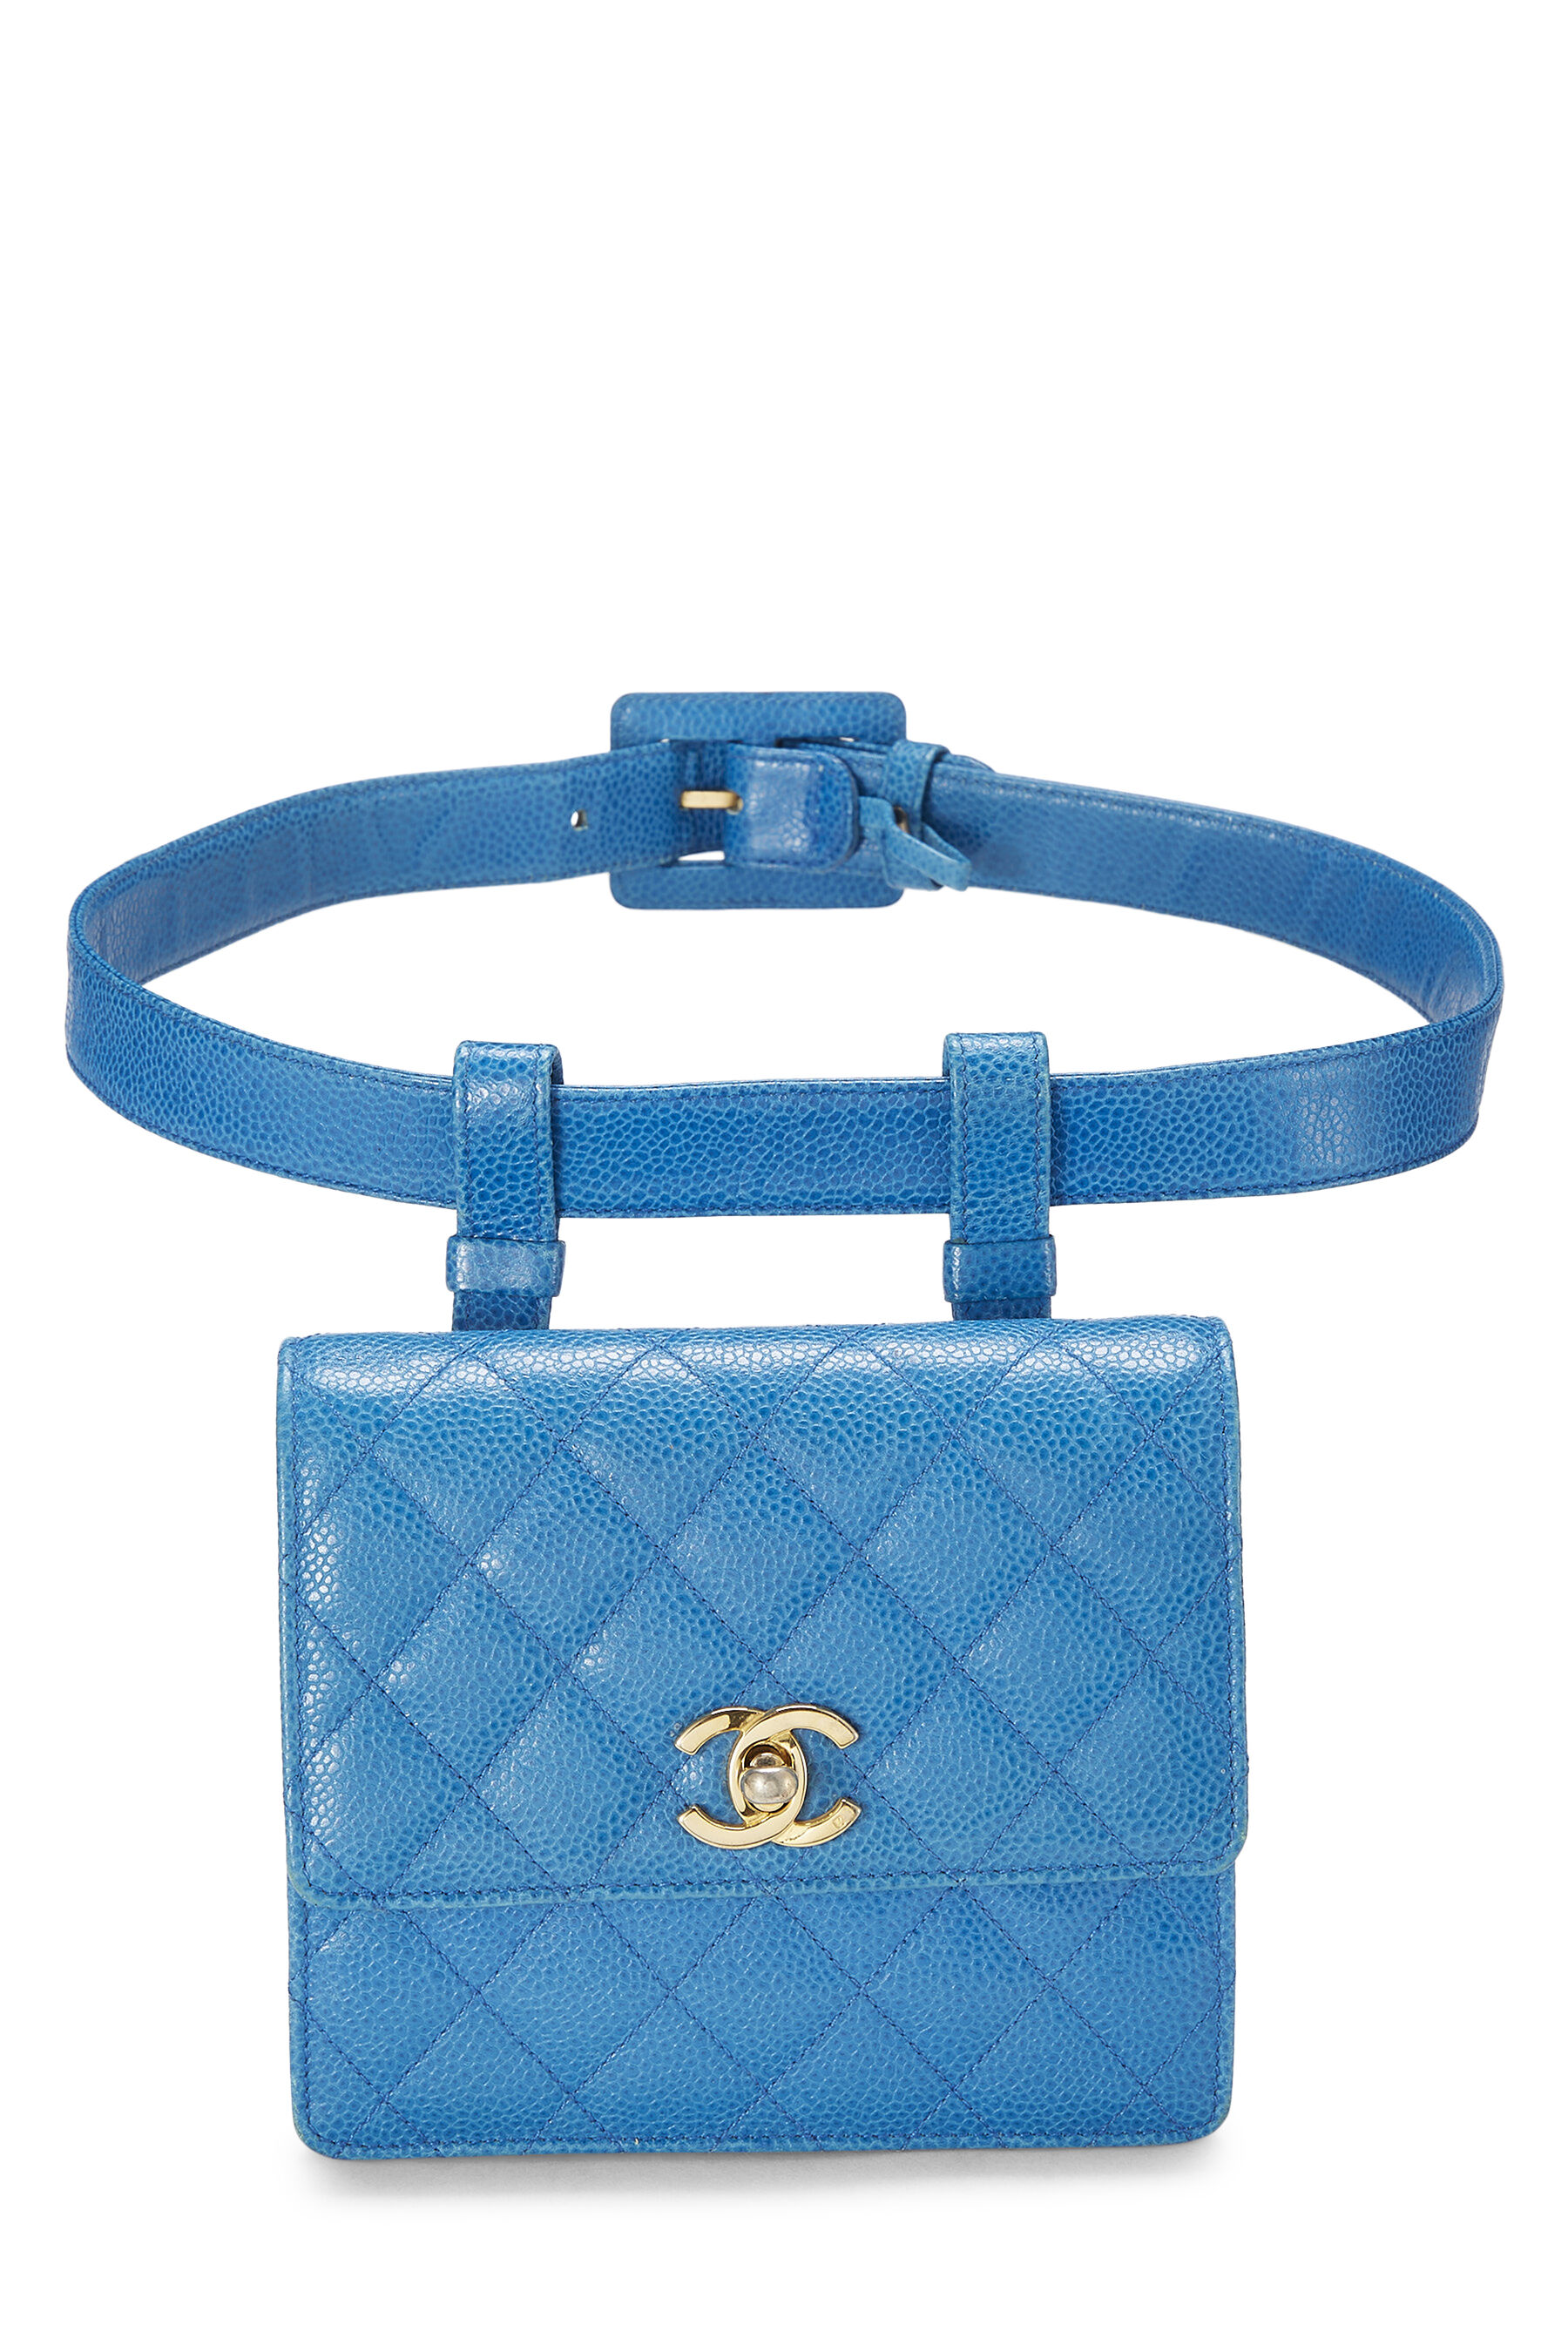 must have chanel bag